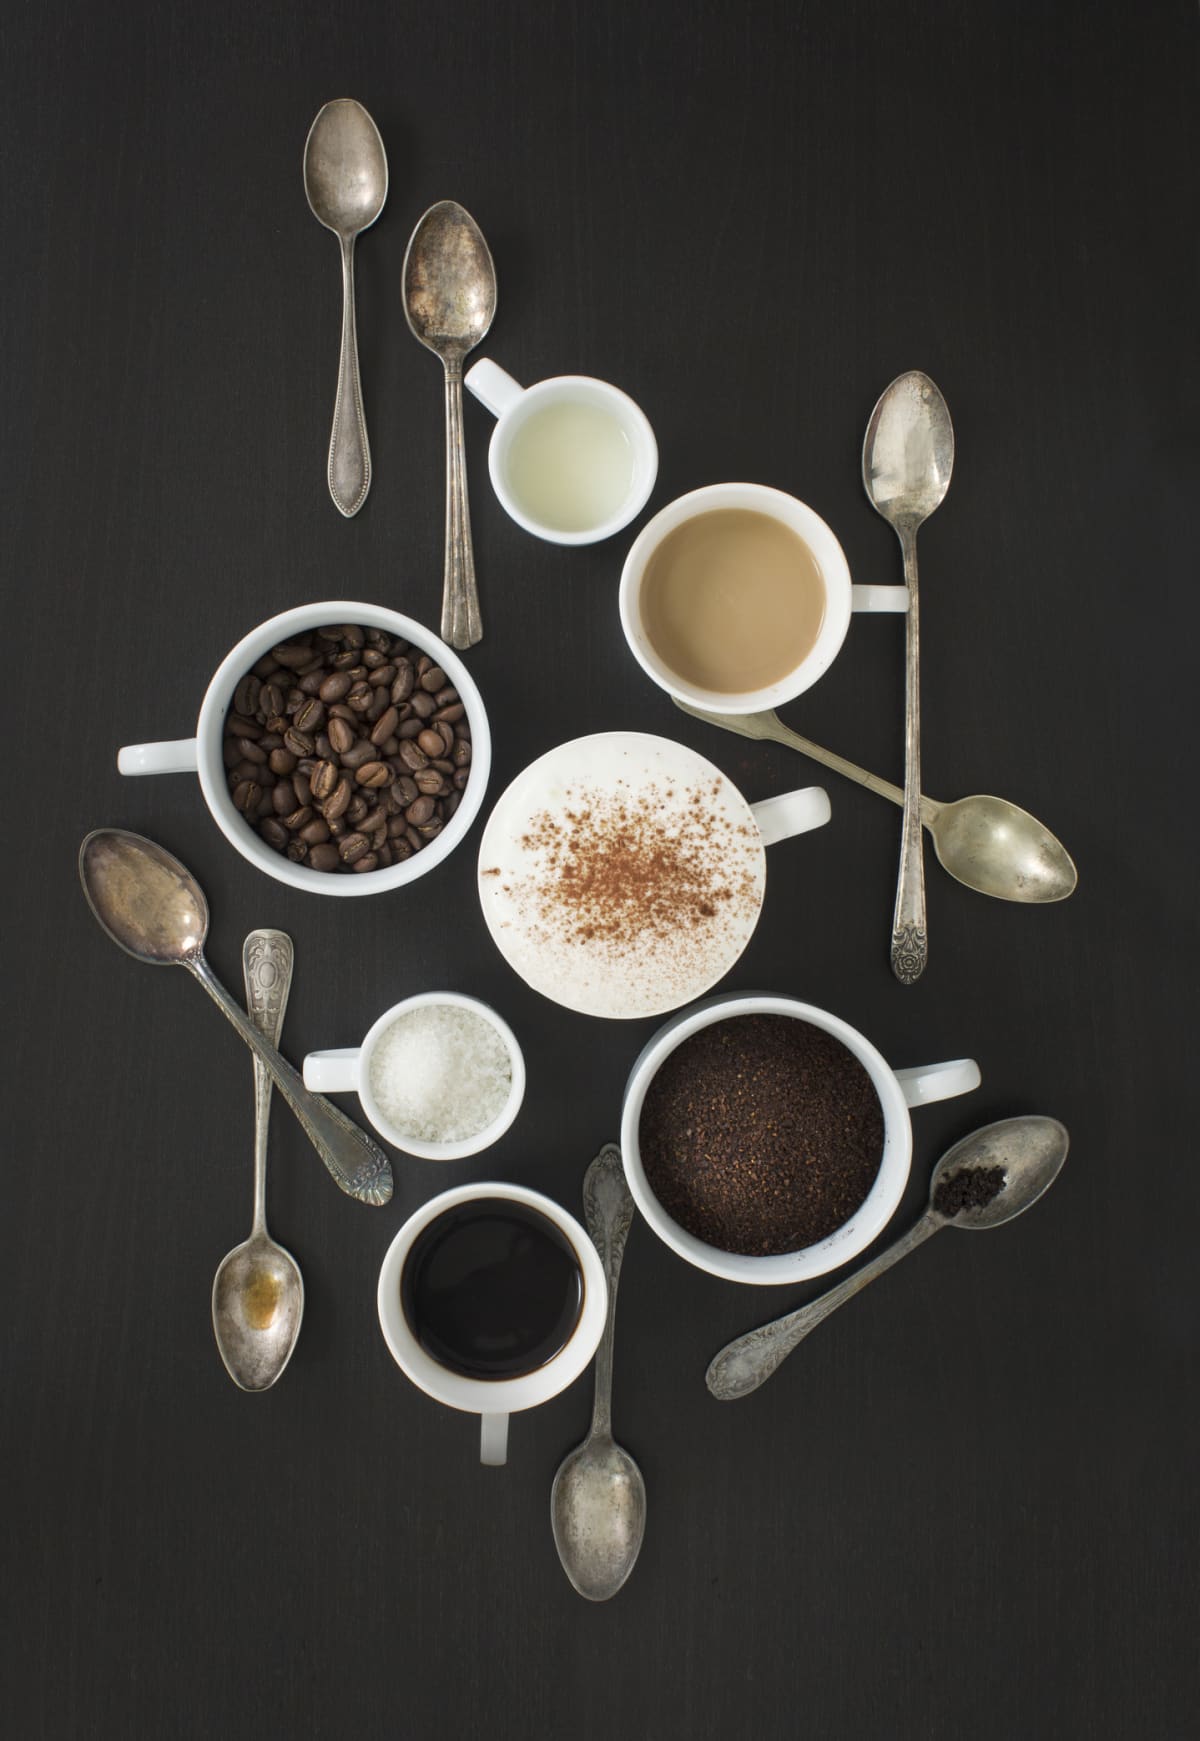 Overhead view flat lay coffee drinks ingredients on black wooden background with vintage spoons. Stylized coffee image.